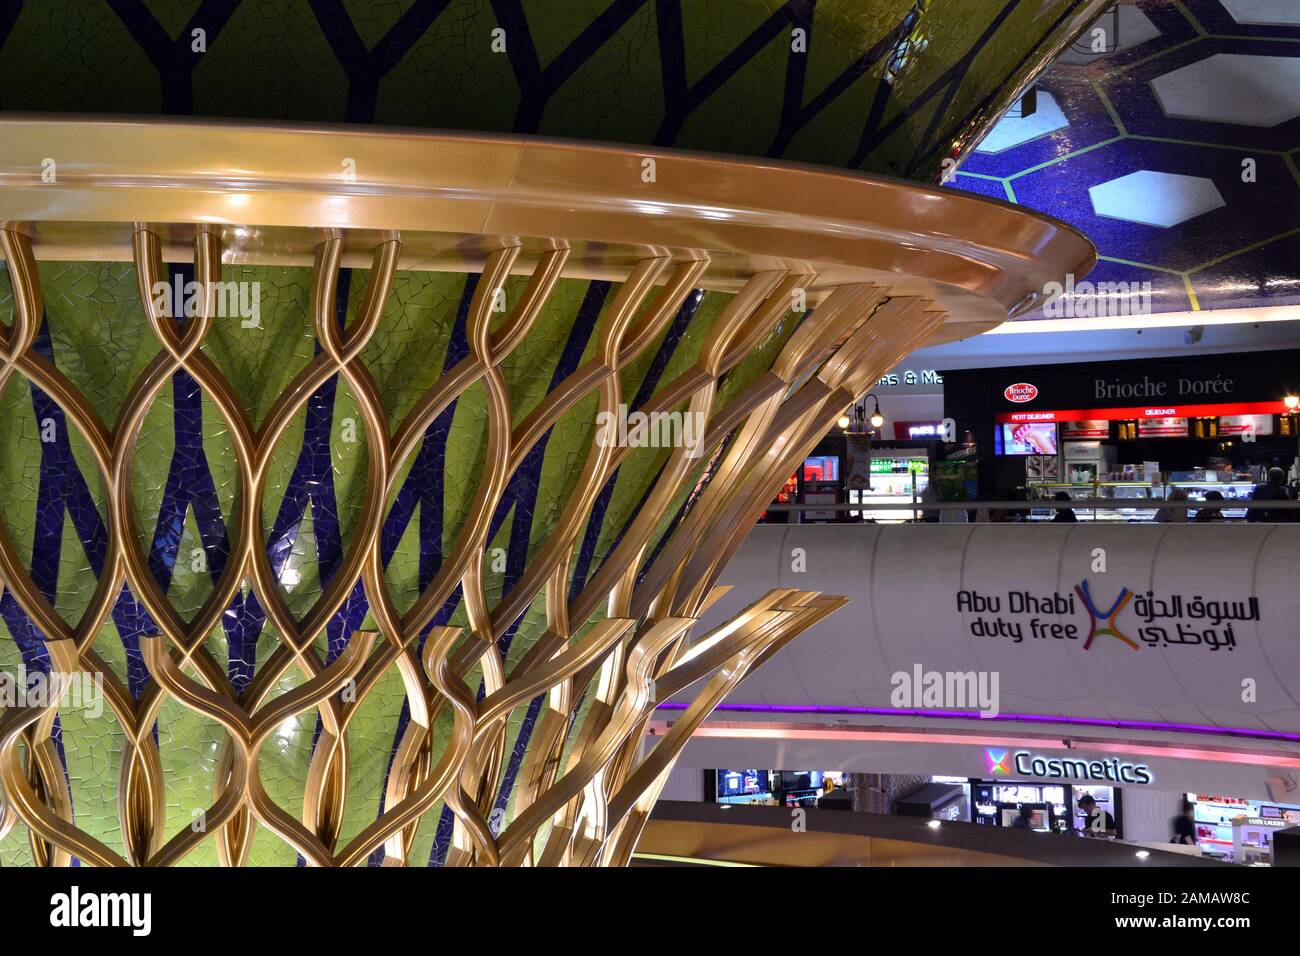 The central area of Terminal 1 at Abu Dhabi Airport, Abu Dhabi, United Arab Emirates, includes a sign mentioning its duty free shopping Stock Photo